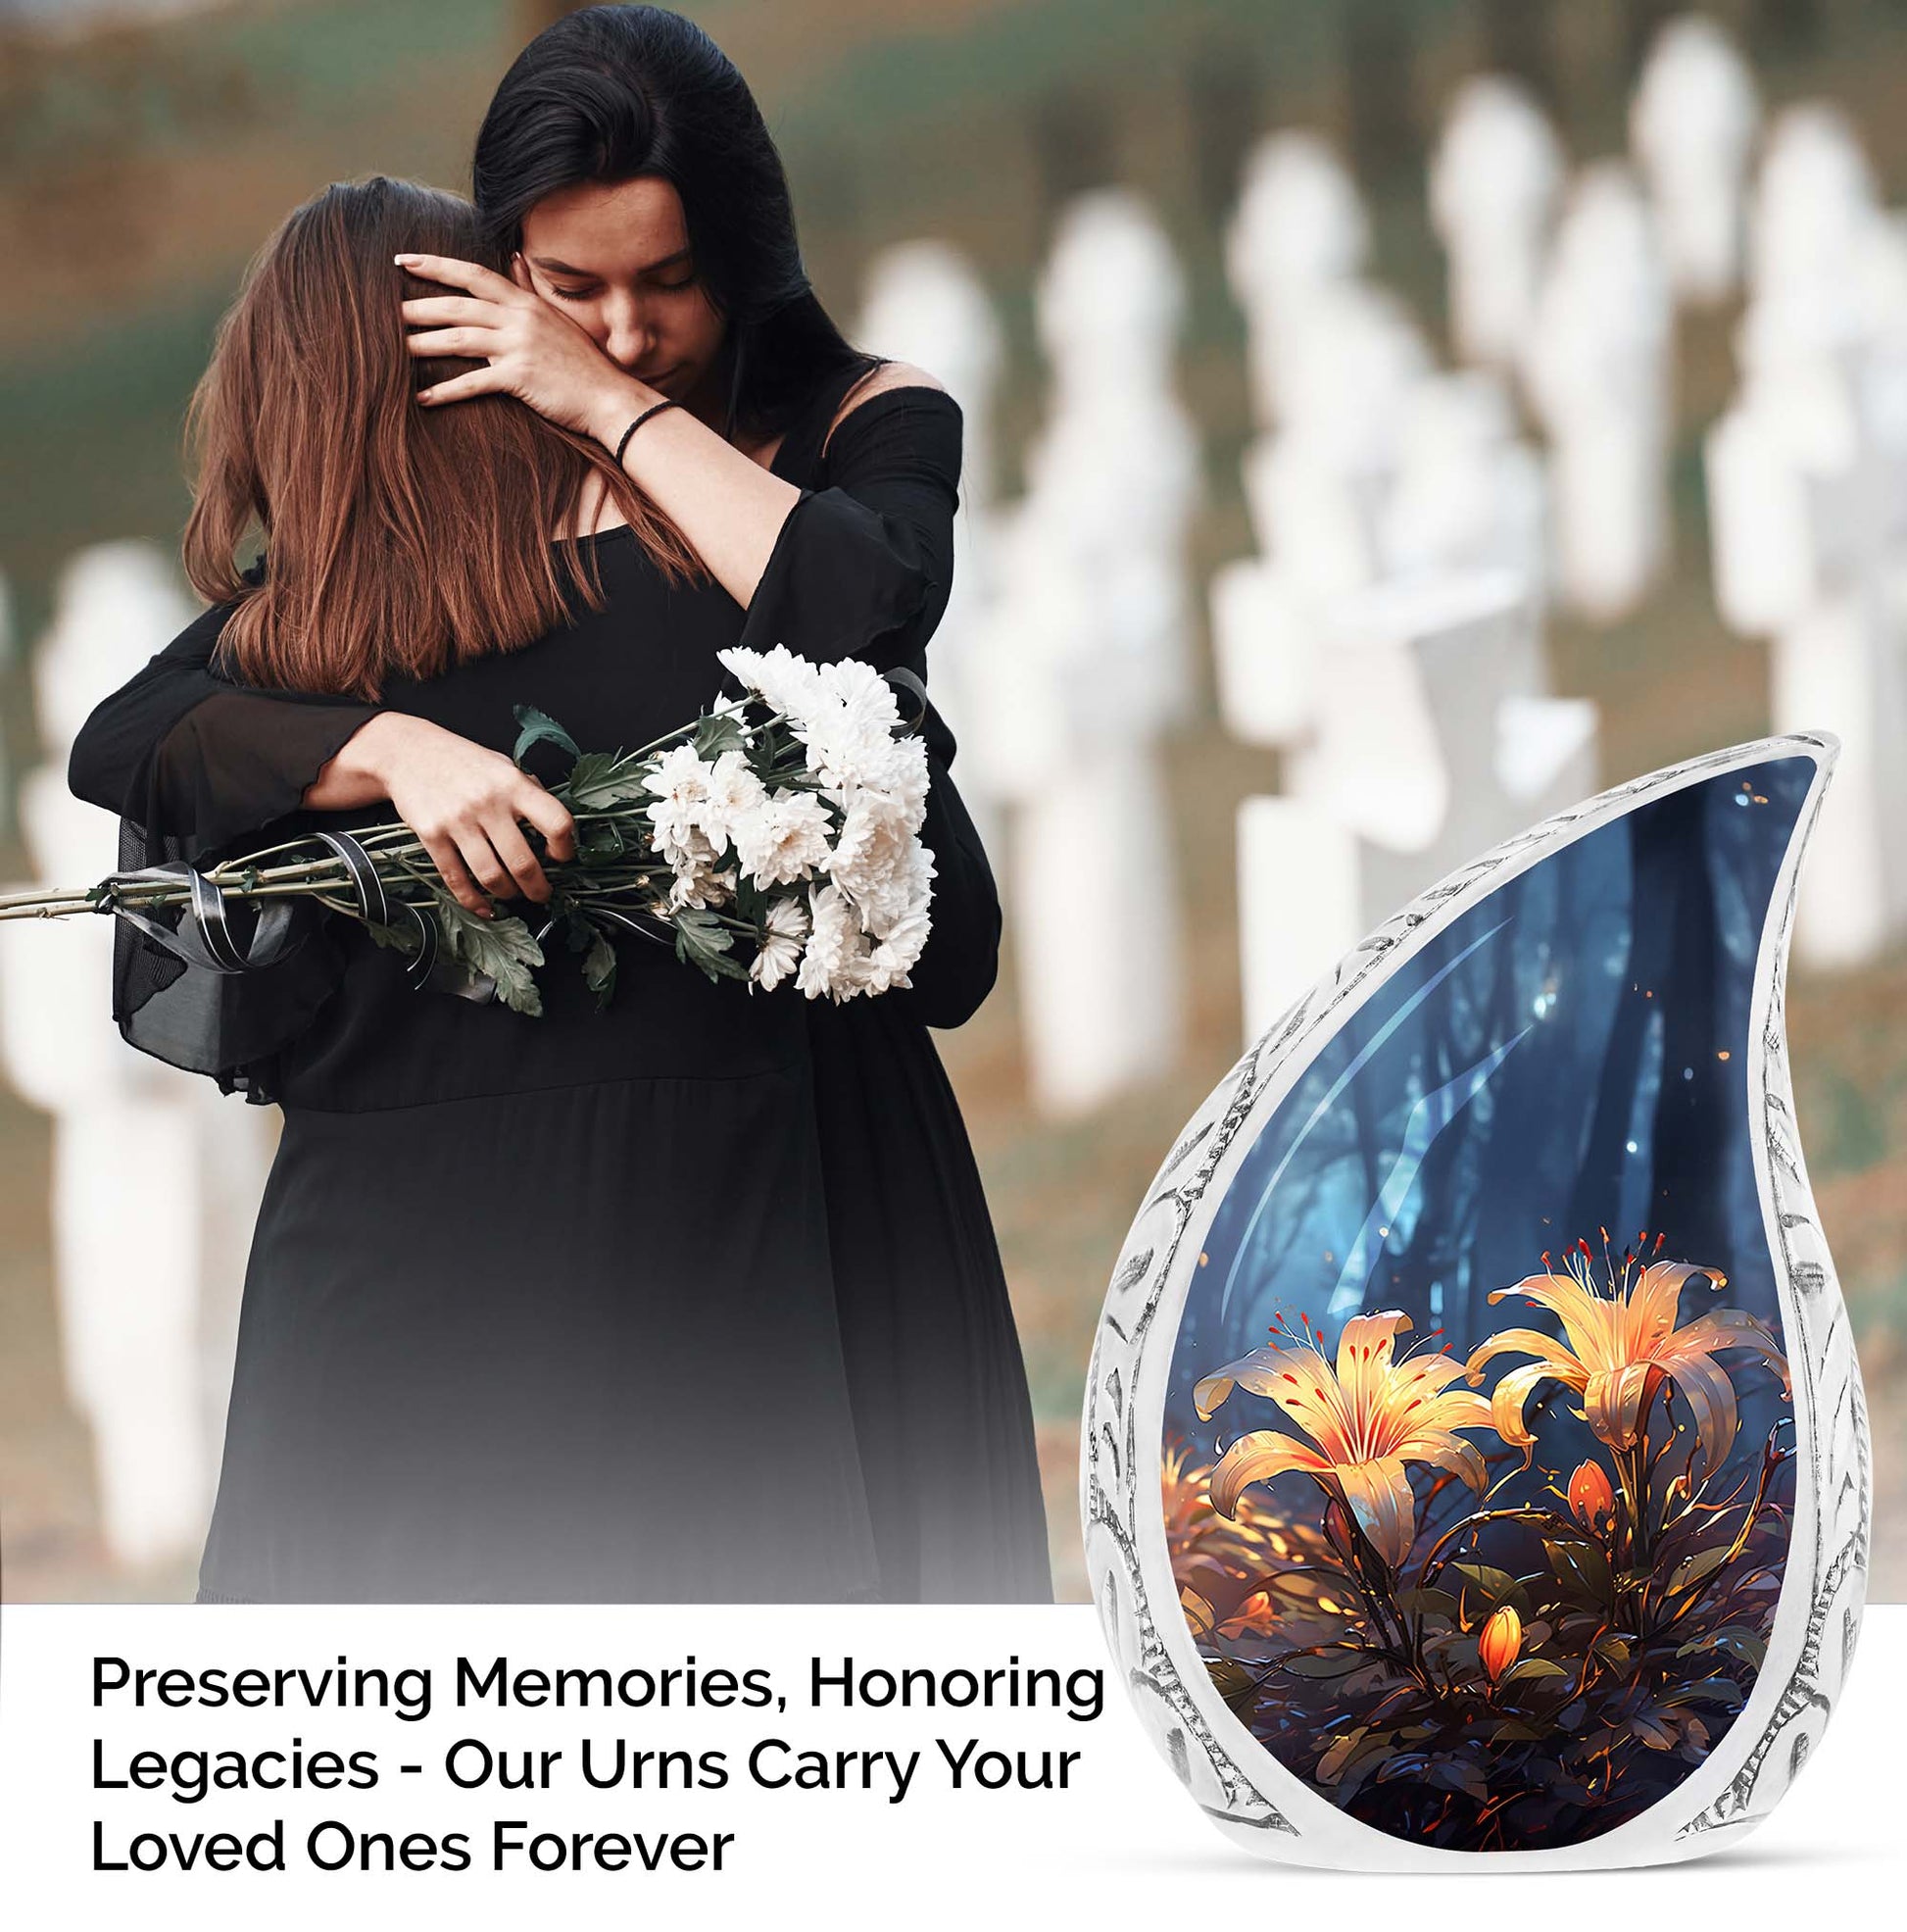 Elegant large urn for ashes featuring a beautiful yellow lilly, suitable for women, designed for burial in ground or metal cremation